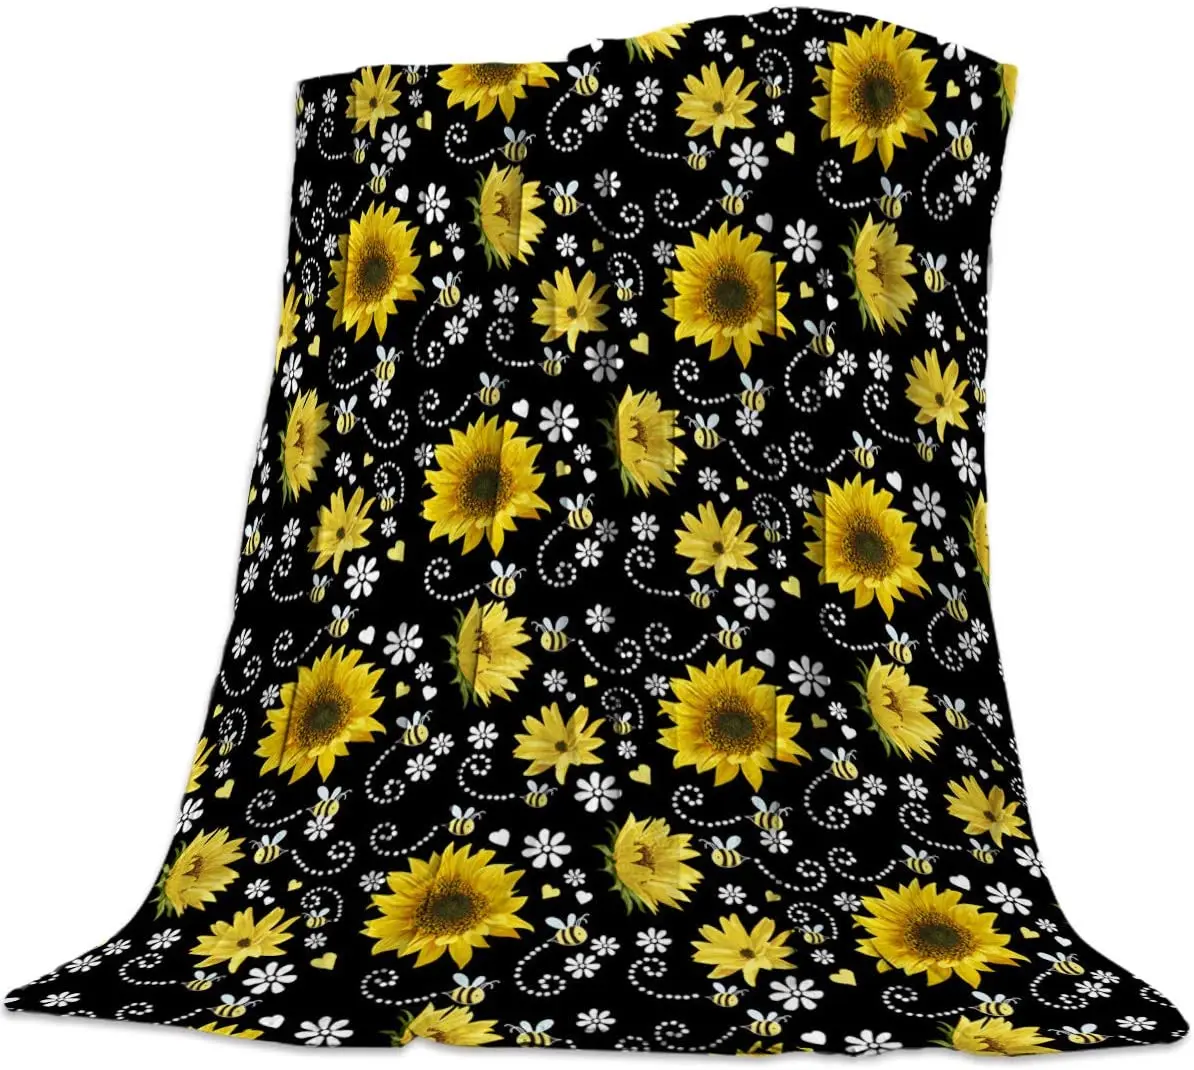 

Vandarllin Yellow Sunflowers and Bees Super Soft Throw Blankets Art Prints Fluffy Fuzzy Flannel Bed Blanket Decorative for Home